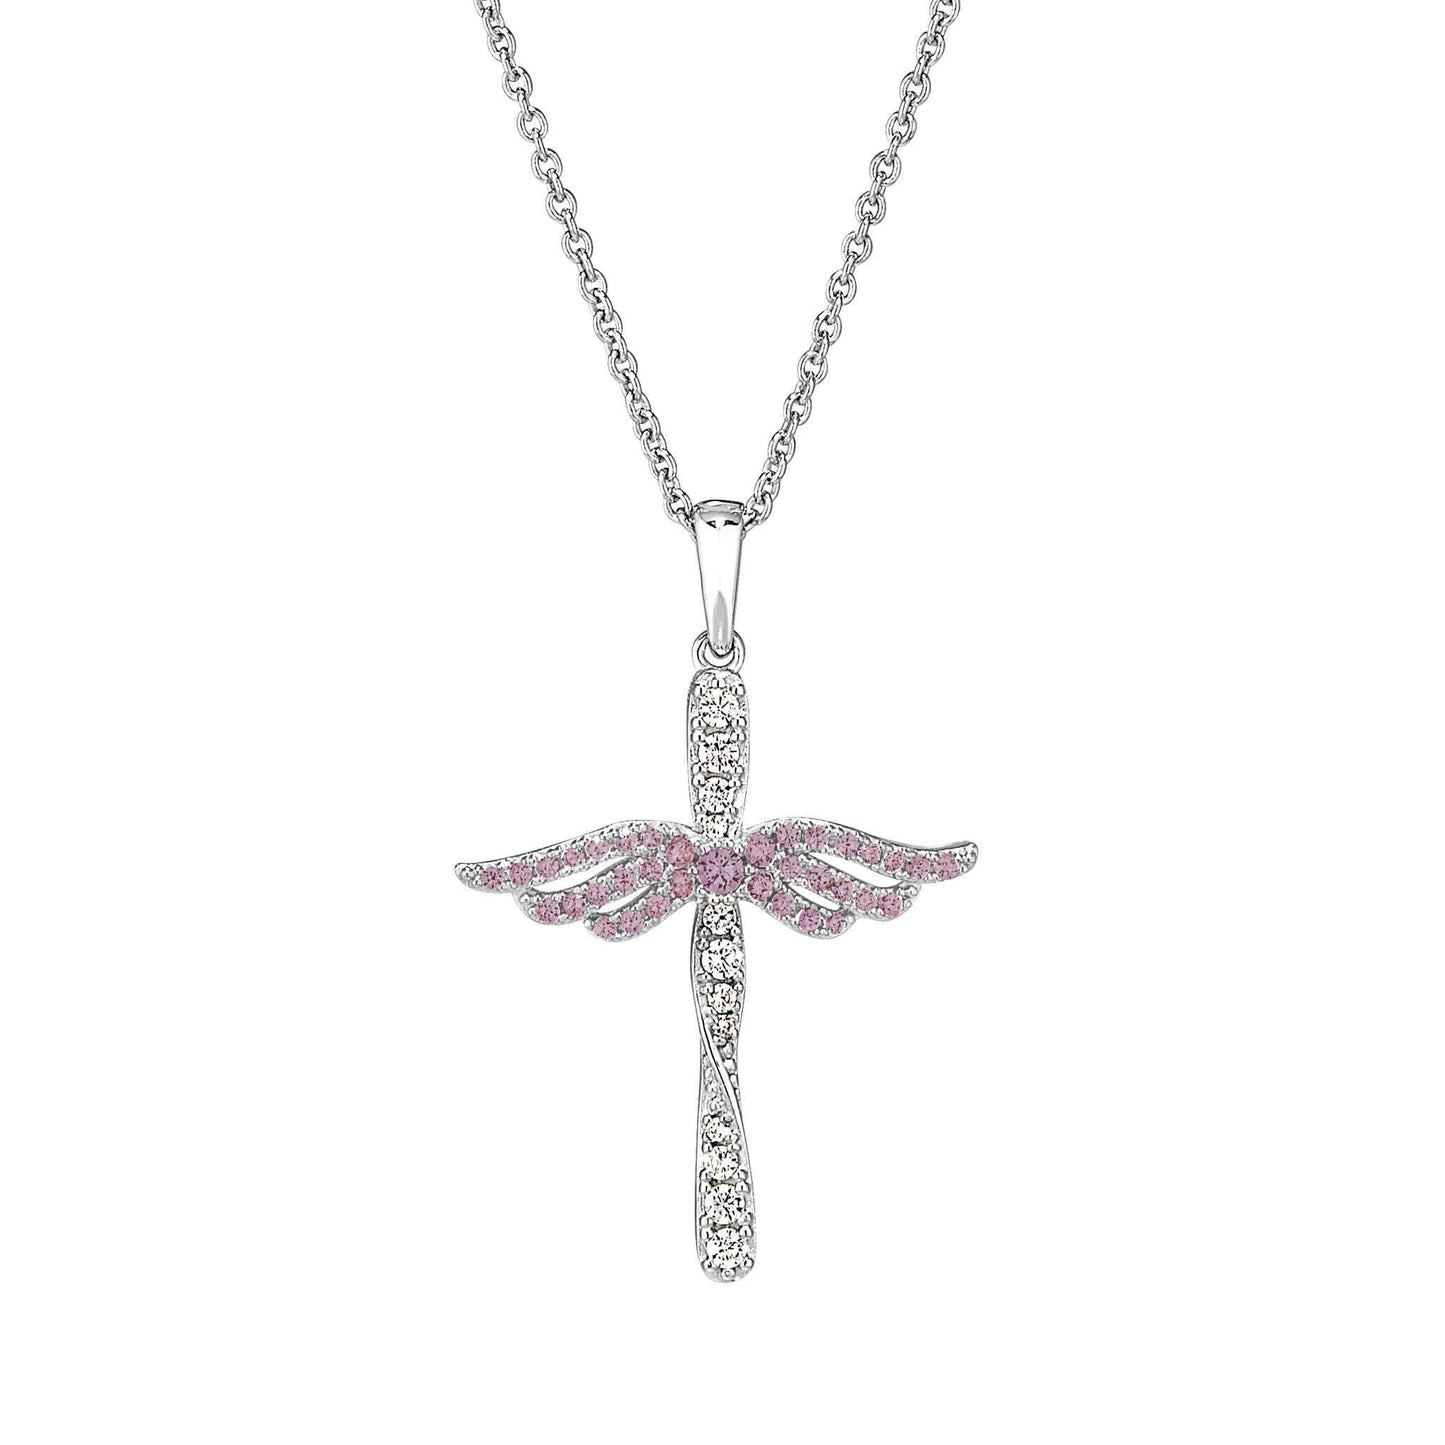 A simulated gemstone & diamonds cross with angel wings displayed on a neutral white background.